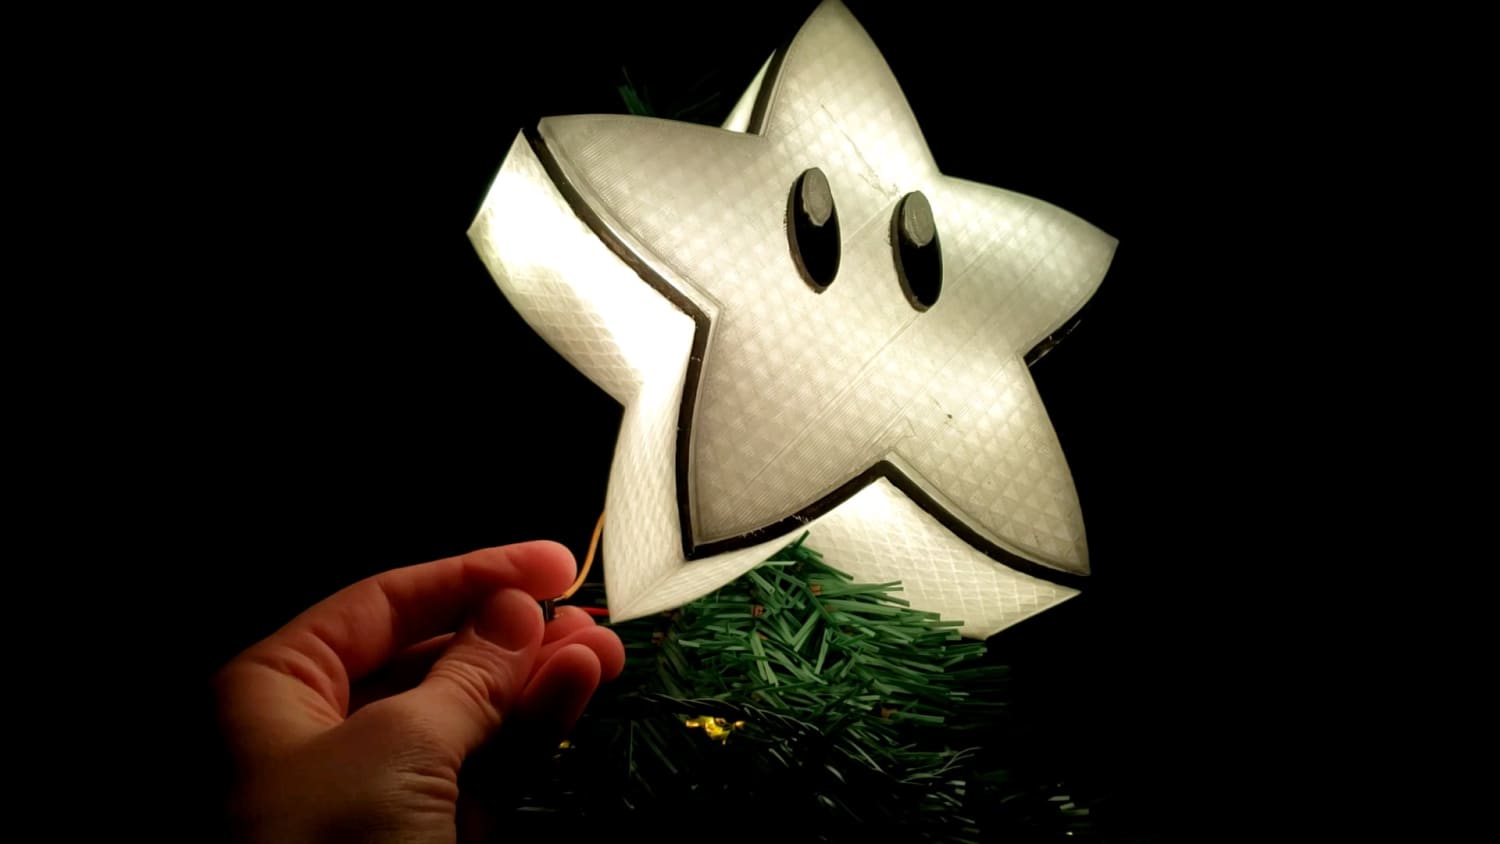 Our first 3d designed, printed, and programmed project. The perfect topper to our Christmas tree!